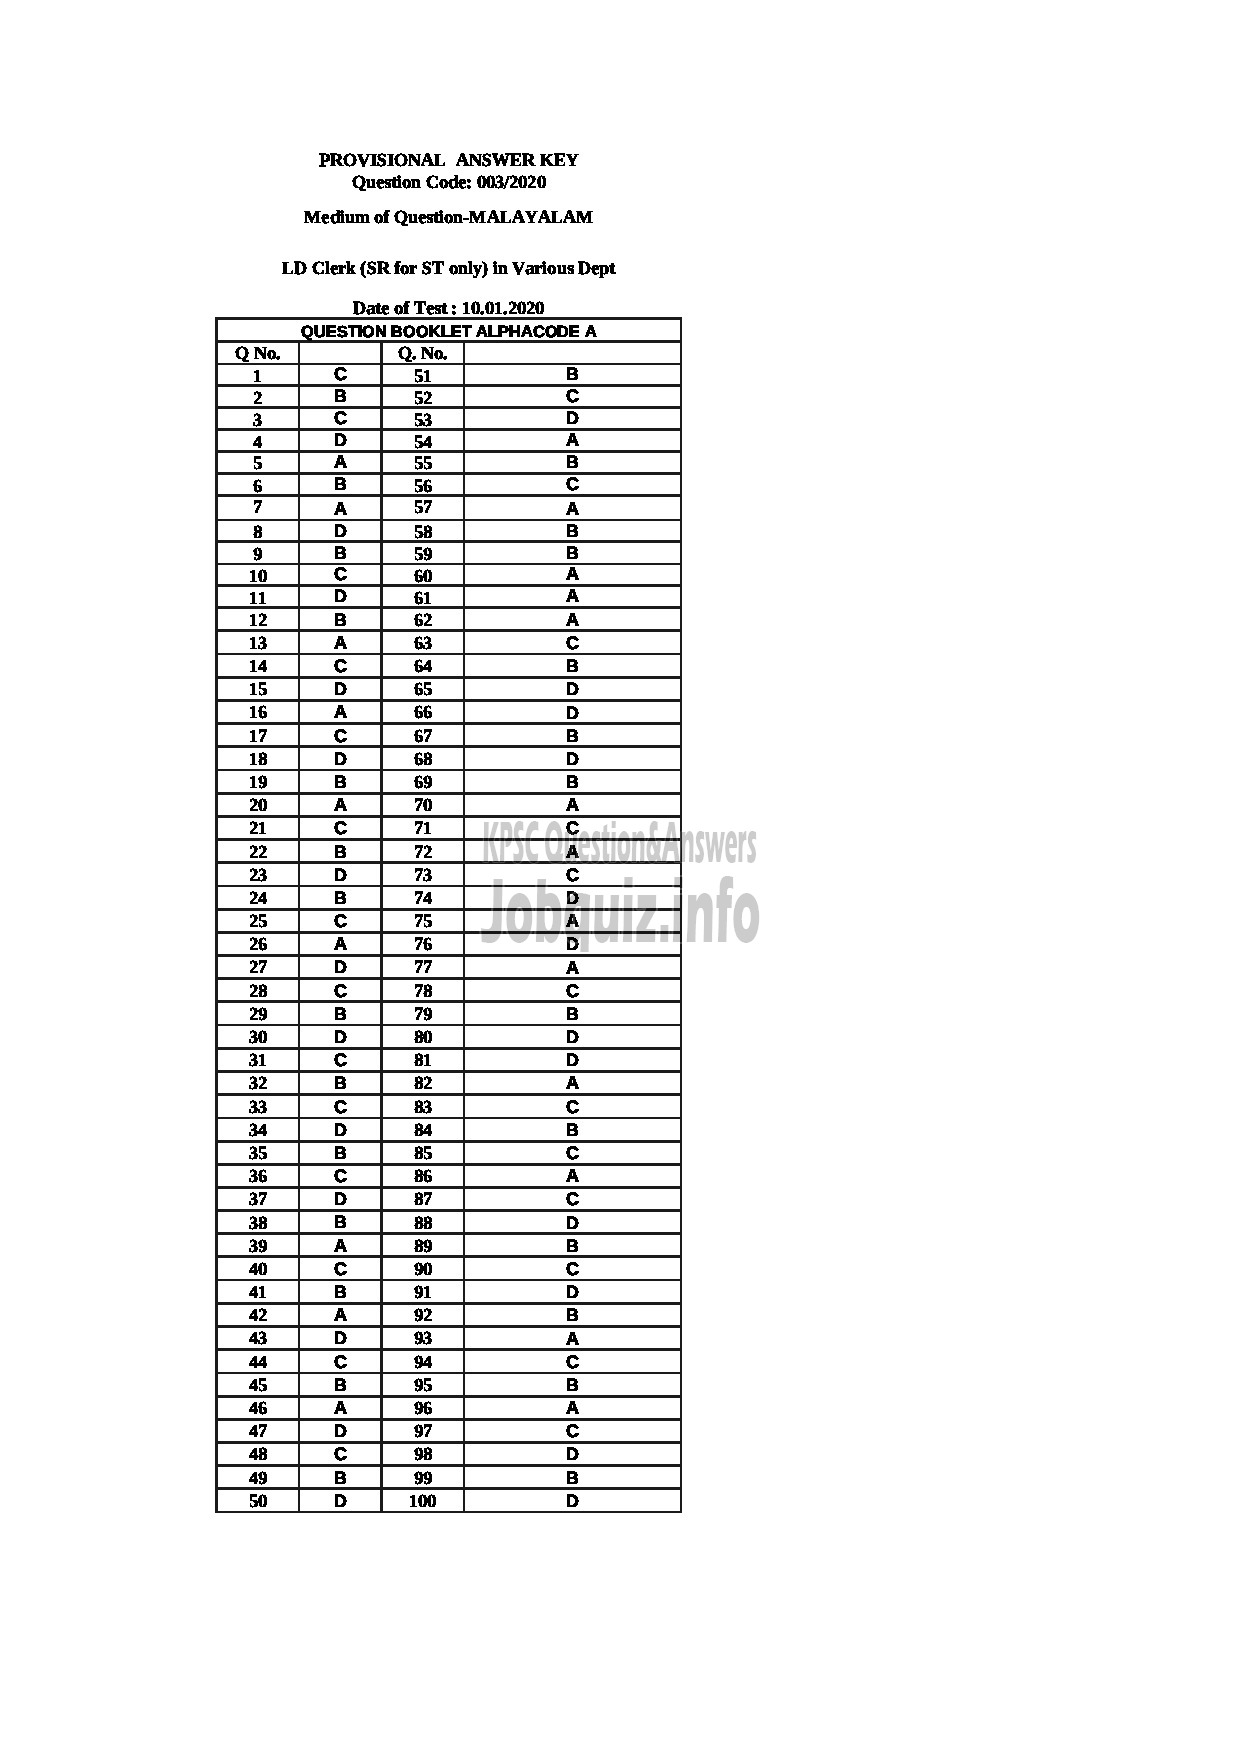 Kerala PSC Answer Key - LD Clerk (SR For ST Only) In Various Dept MALAYALAM 